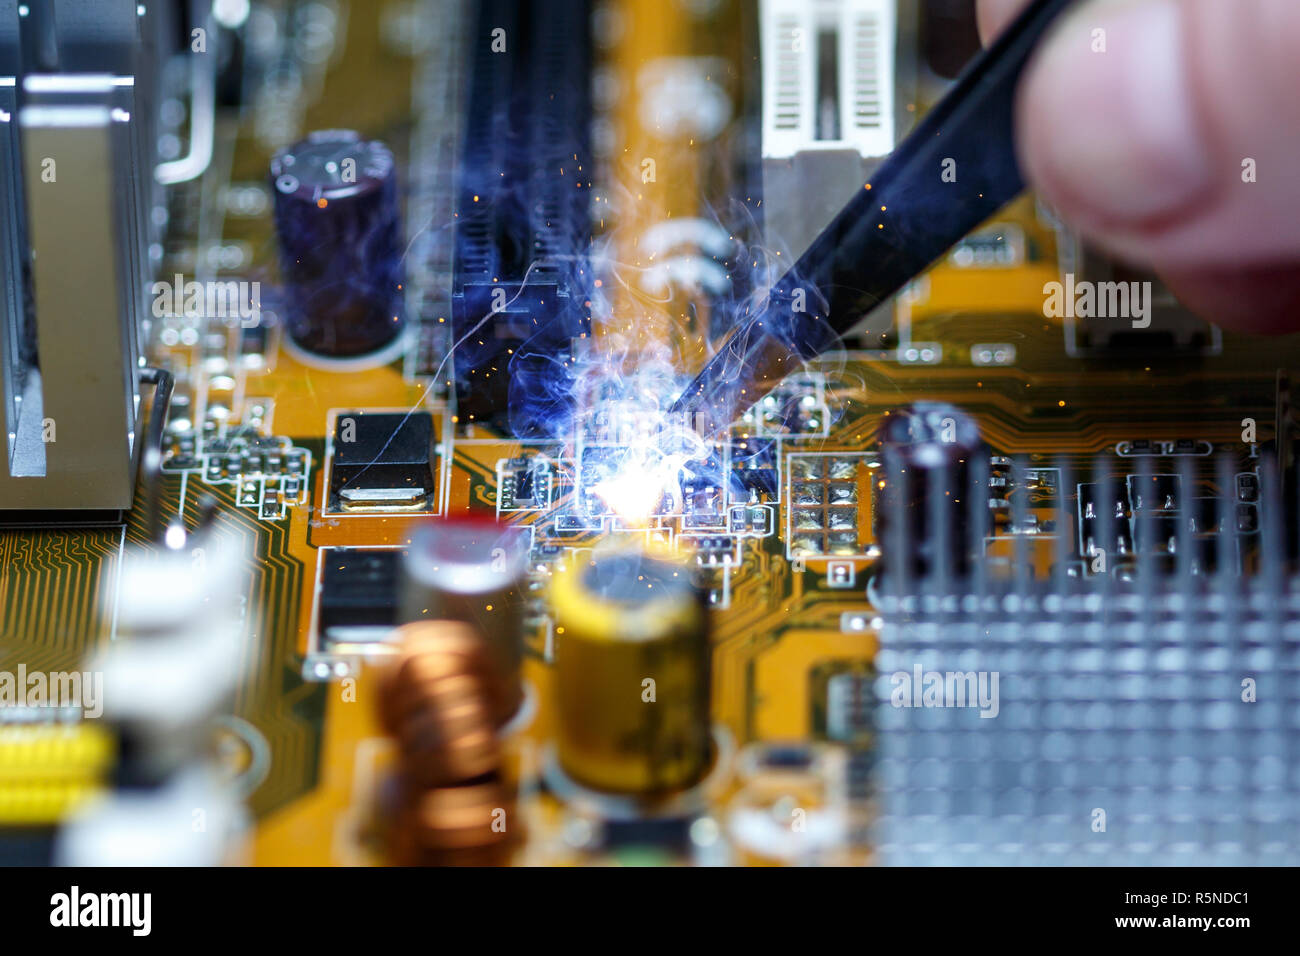 Short circuit on the motherboard during repair Stock Photo